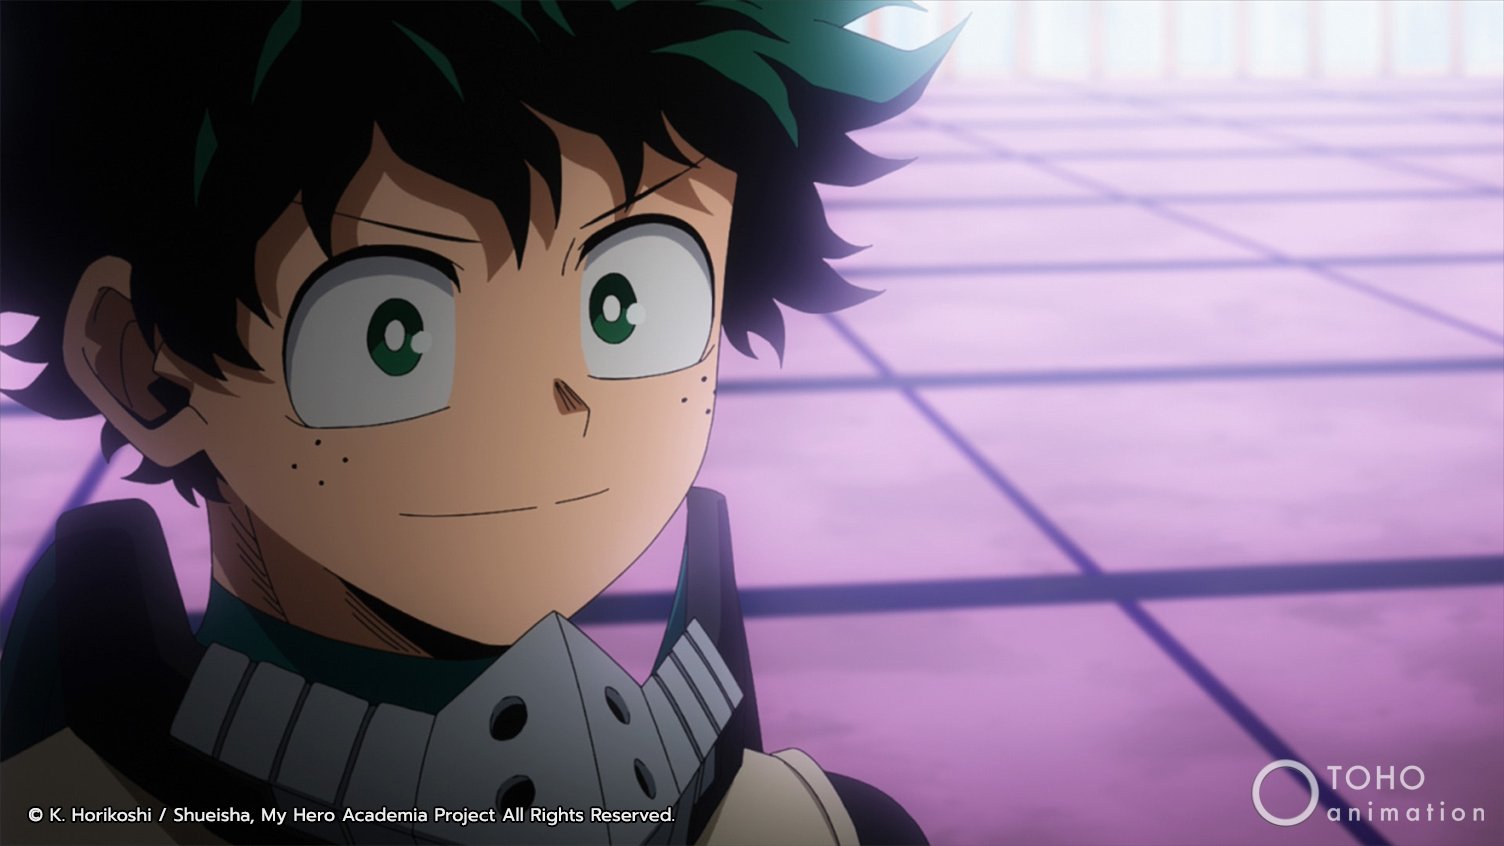 A still of Deku in 'My Hero Academia' Season 5. He's standing and smiling, and you can see a tiled floor behind him. What happened to Deku's father?